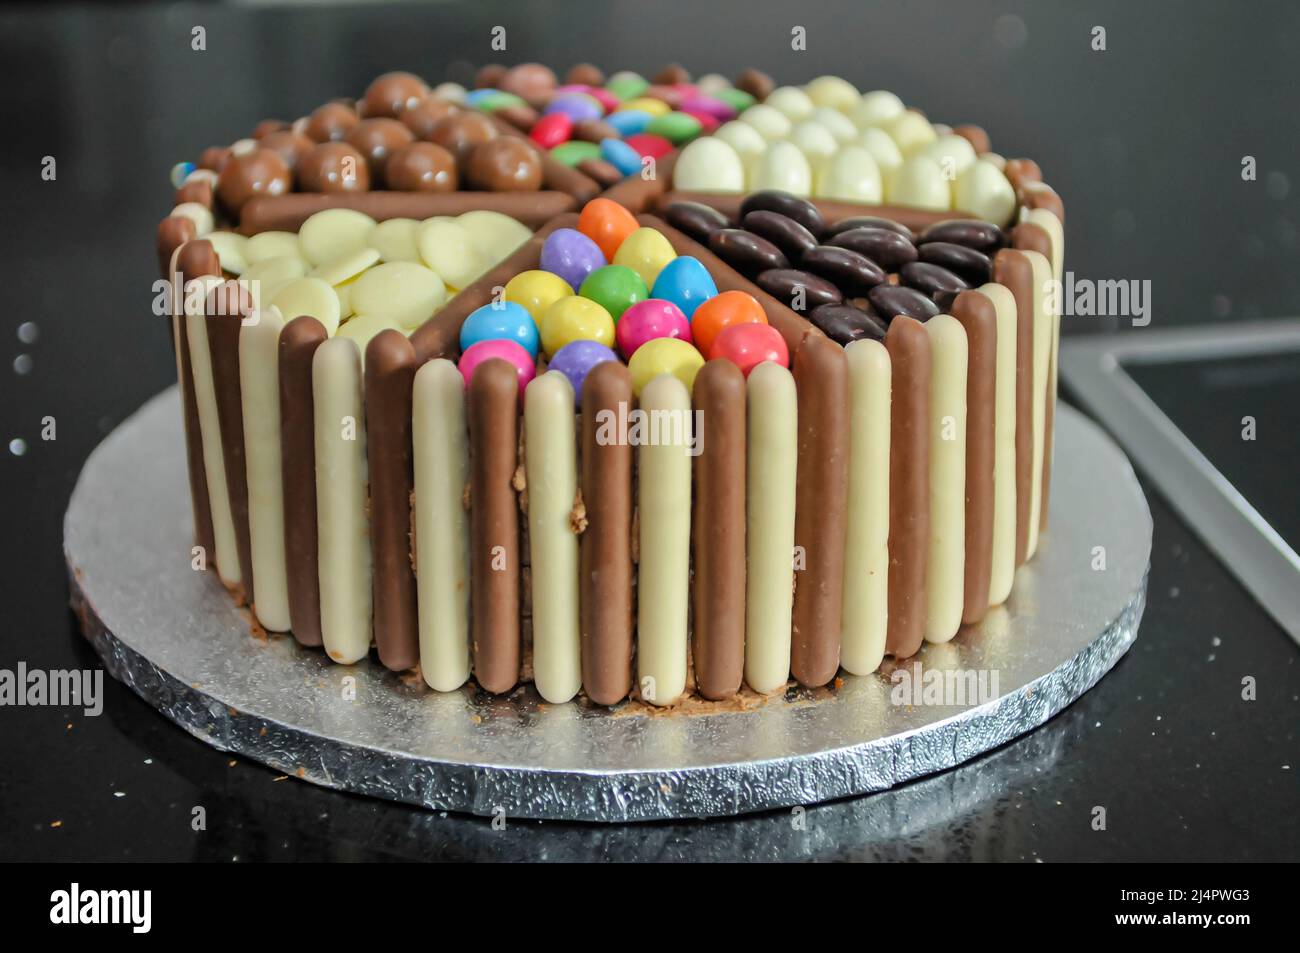 Cake decorated with chocolate fingers, white chocolate, M&Ms, Minstrels, Maltesers and Smarties Stock Photo